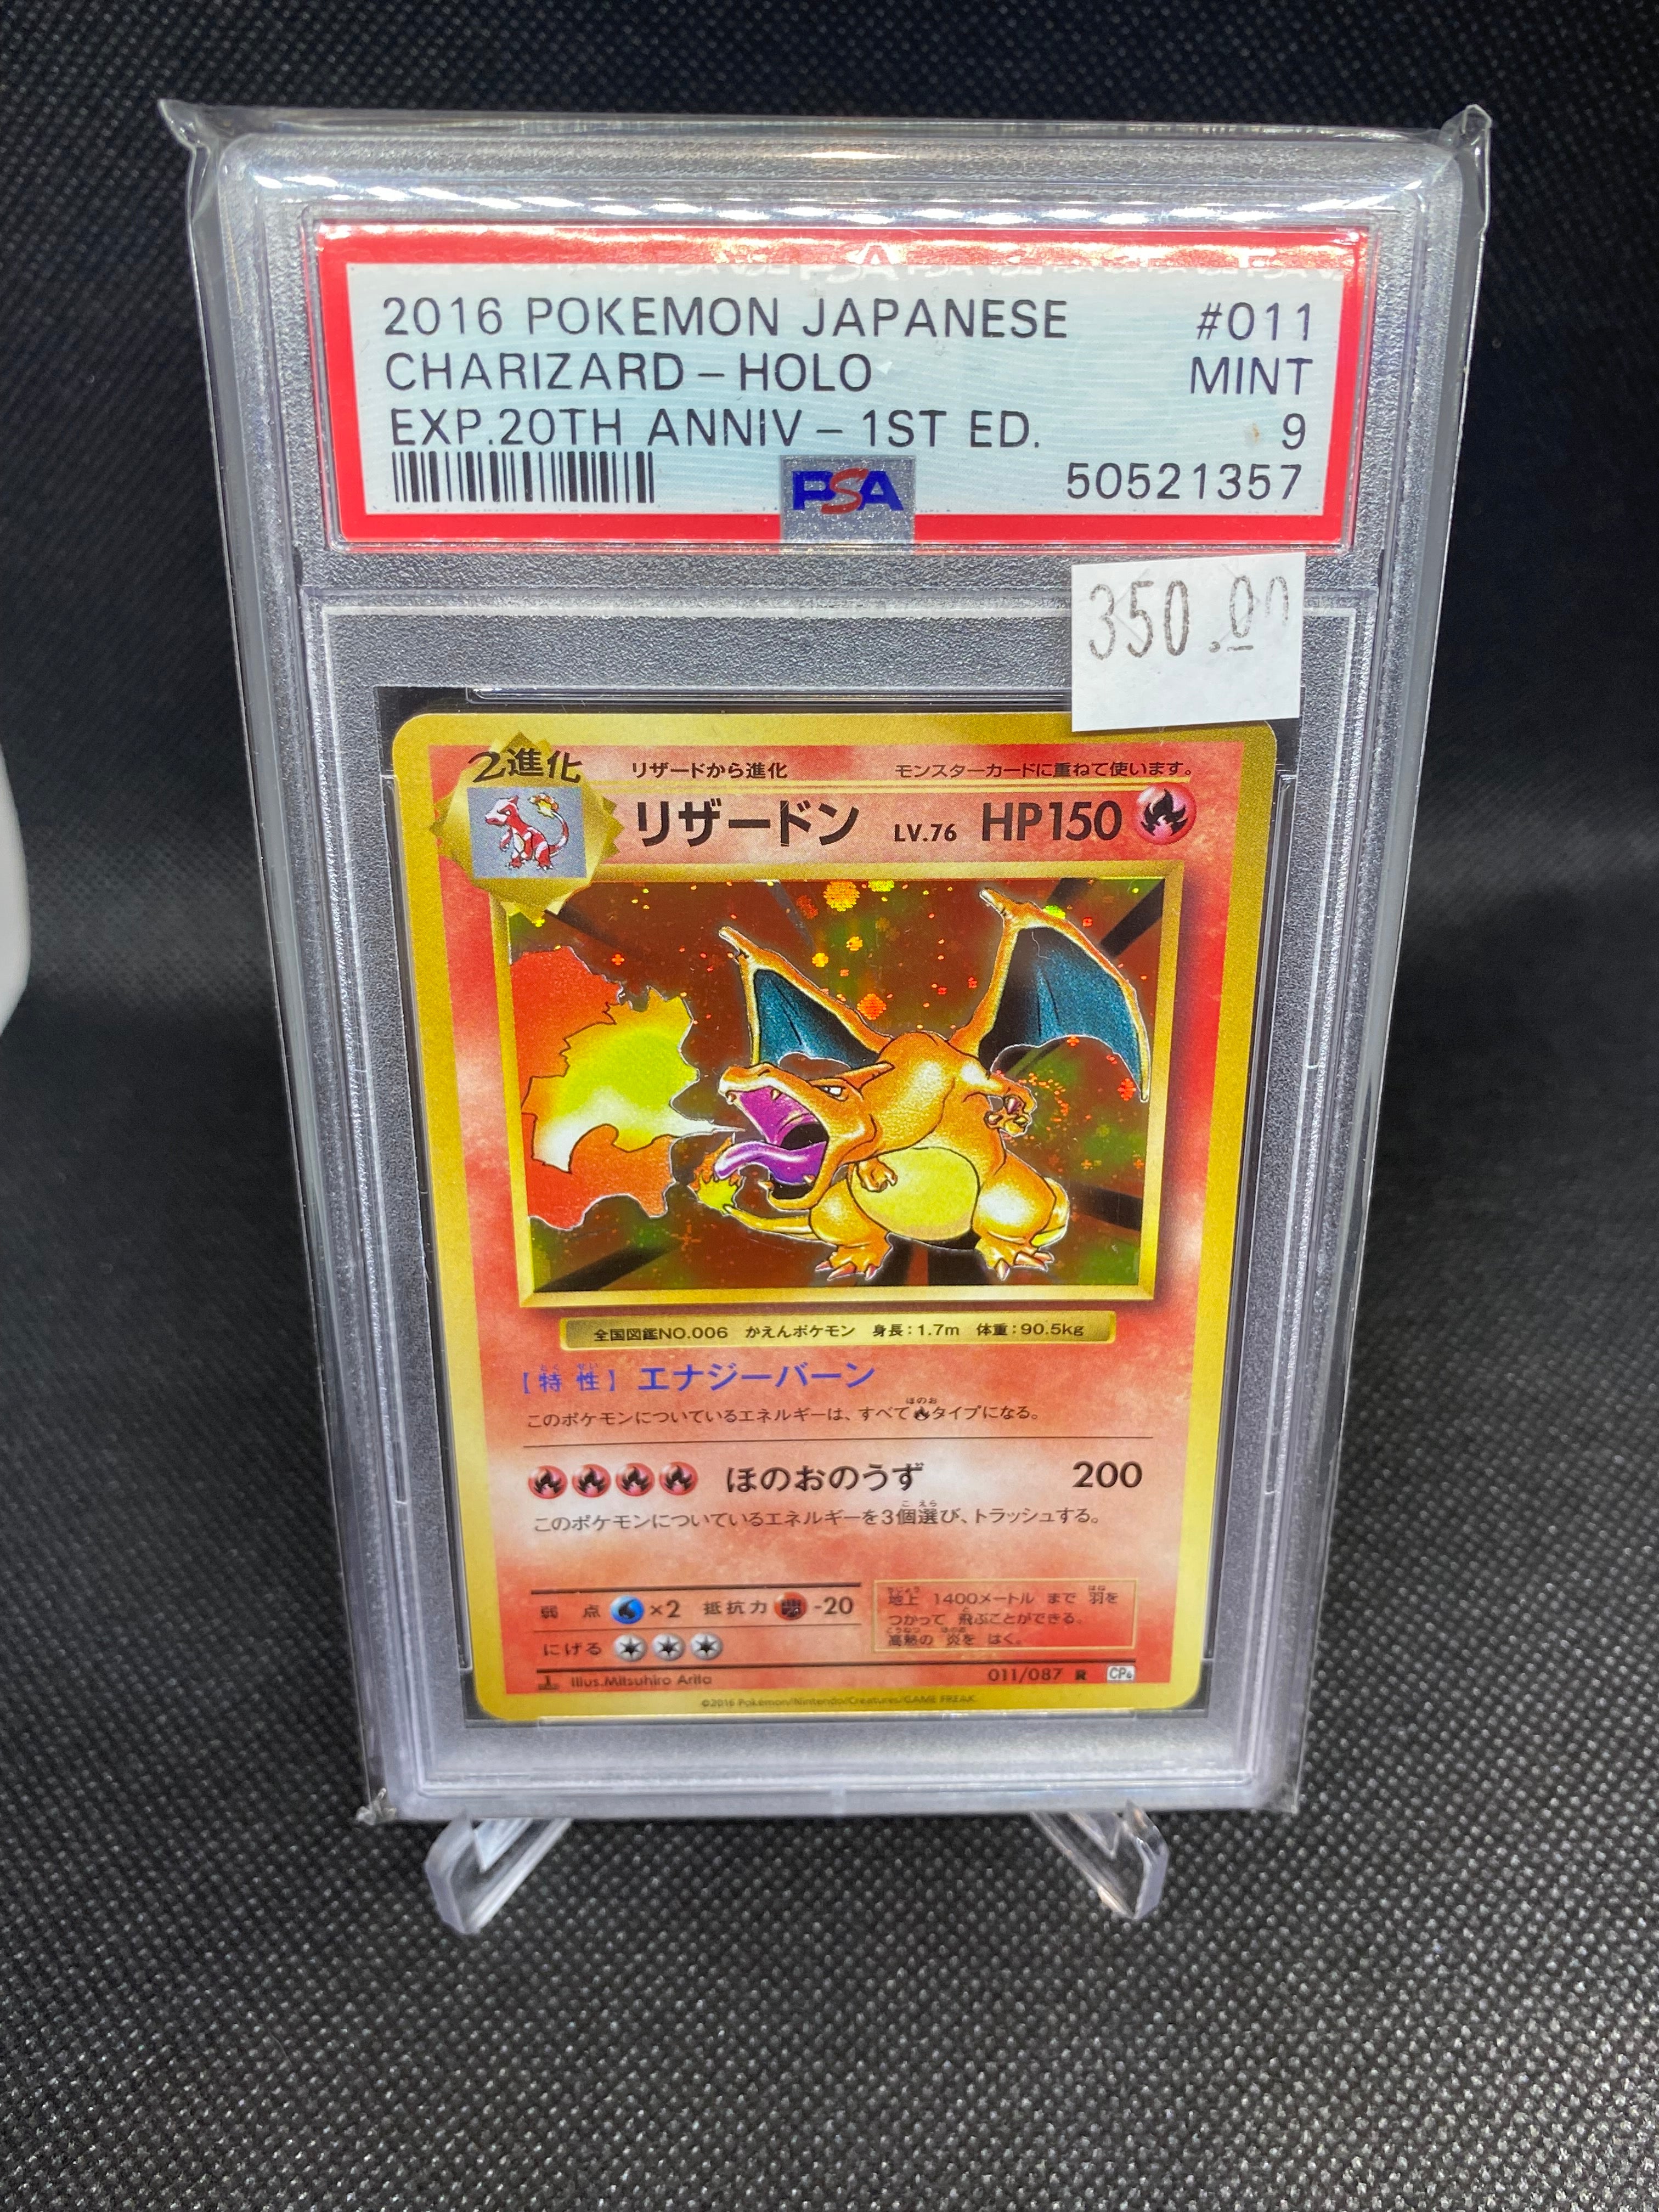 PSA 9 MINT 1st Edition Charizard 011/087 - 20th Anniversary Expansion 2016